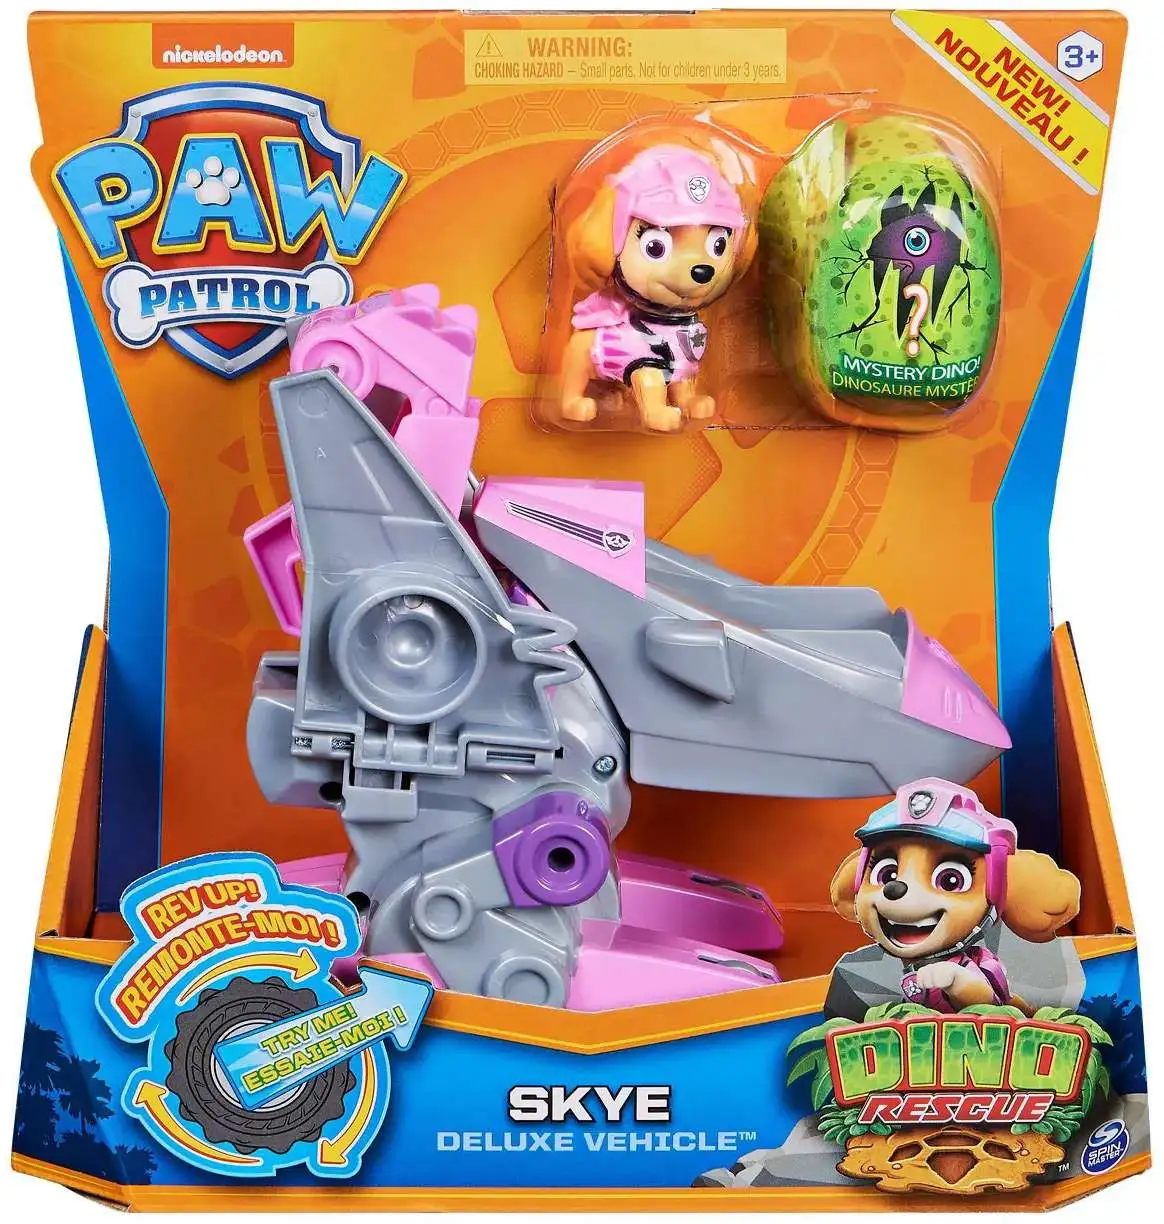 Paw Patrol Dino Rescue Rev Up Rocky Deluxe Vehicle 2019 Spin Master #20126719 